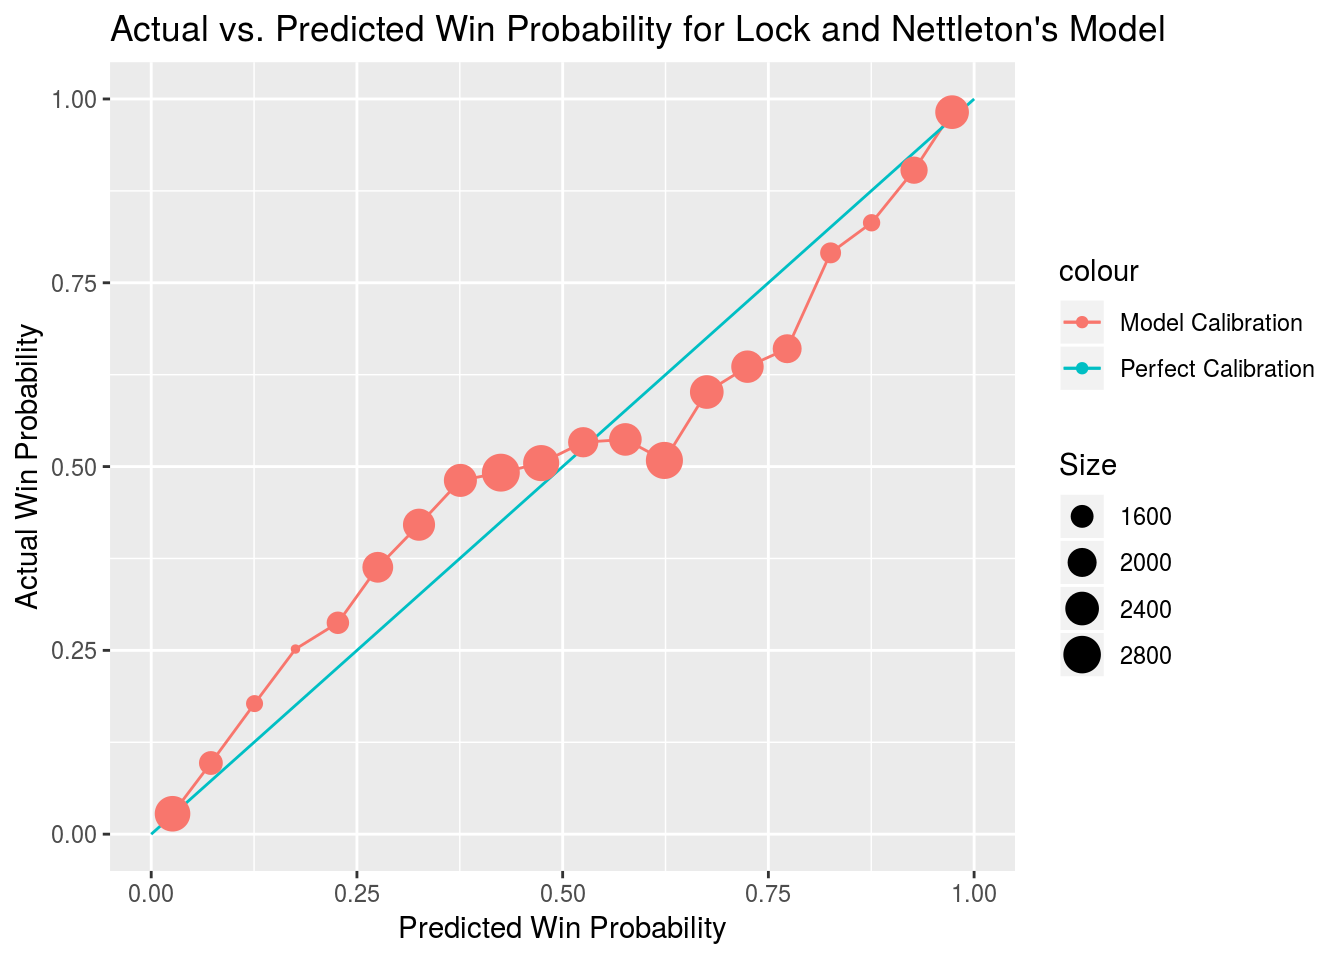 Chapter 4 Applications  Modeling Win Probability in NFL Games